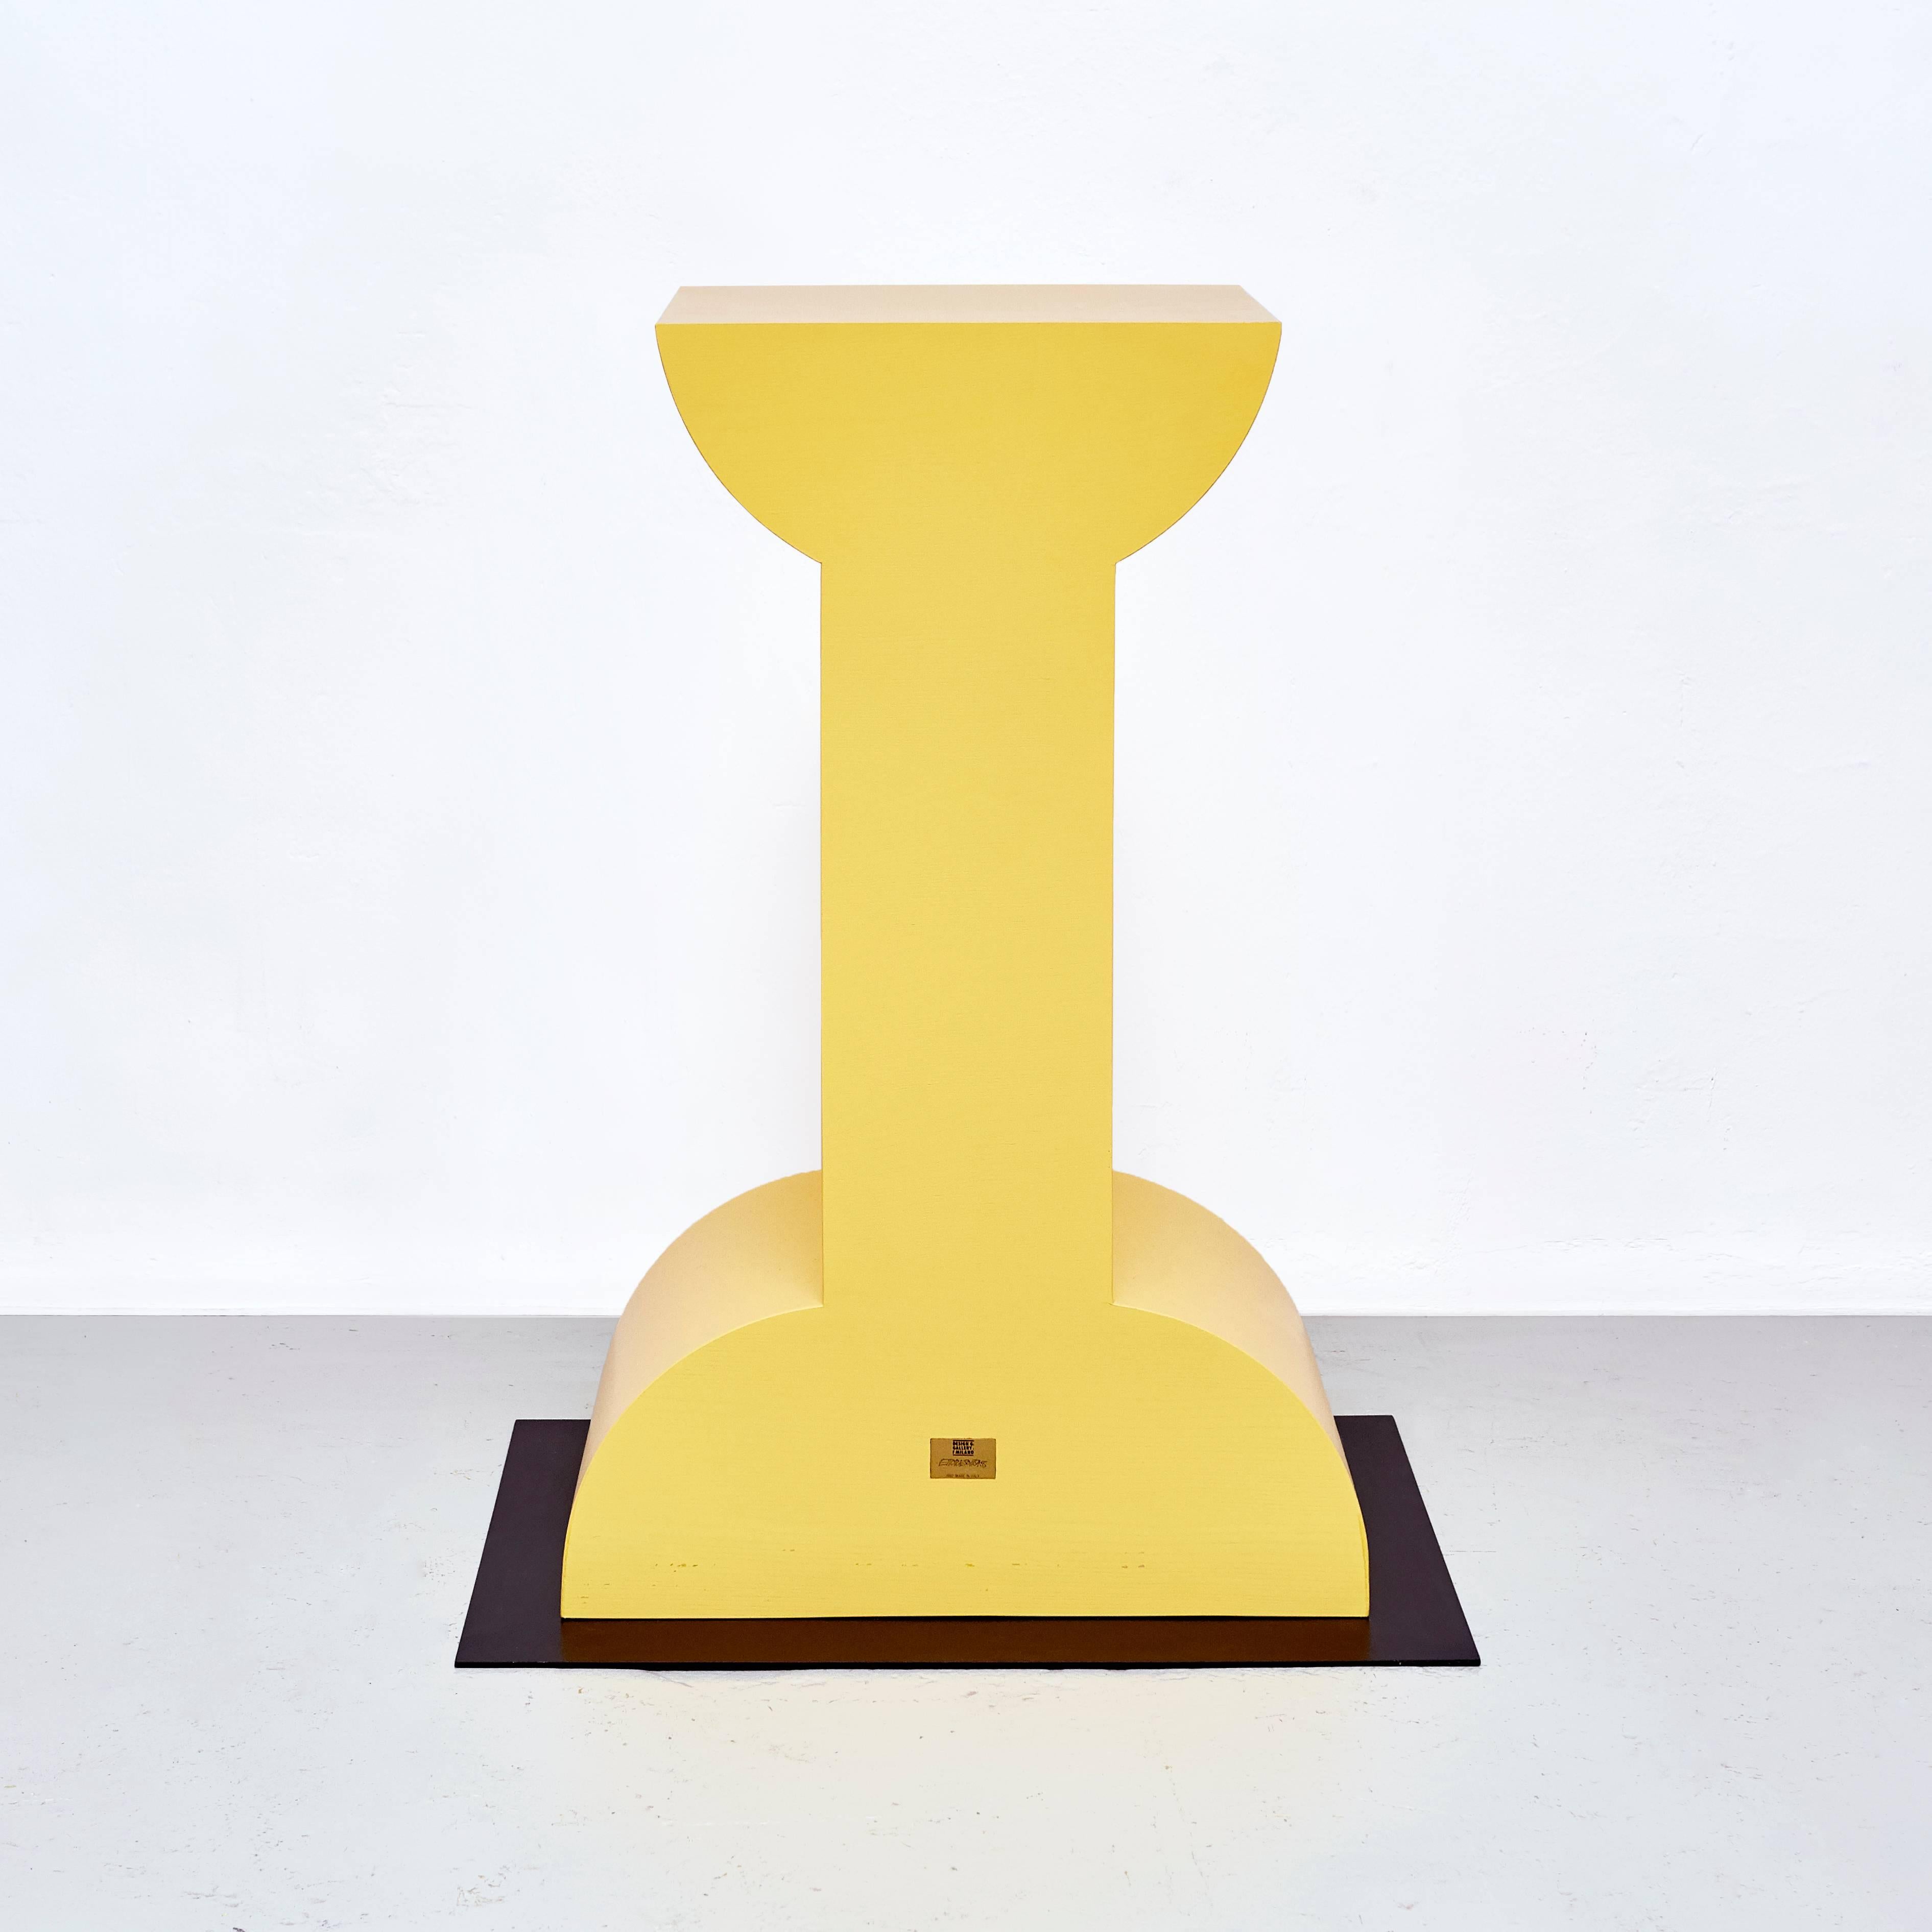 Pedestal Missionario designed by Ettore Sottsass in 1992 edited by Design Gallery Milano.

With metal plaque “ design/gallery/milano/Ettore Sottsass/1992 made in italy.” From the Ruins 

Wood, metal.

In original condition, with wear